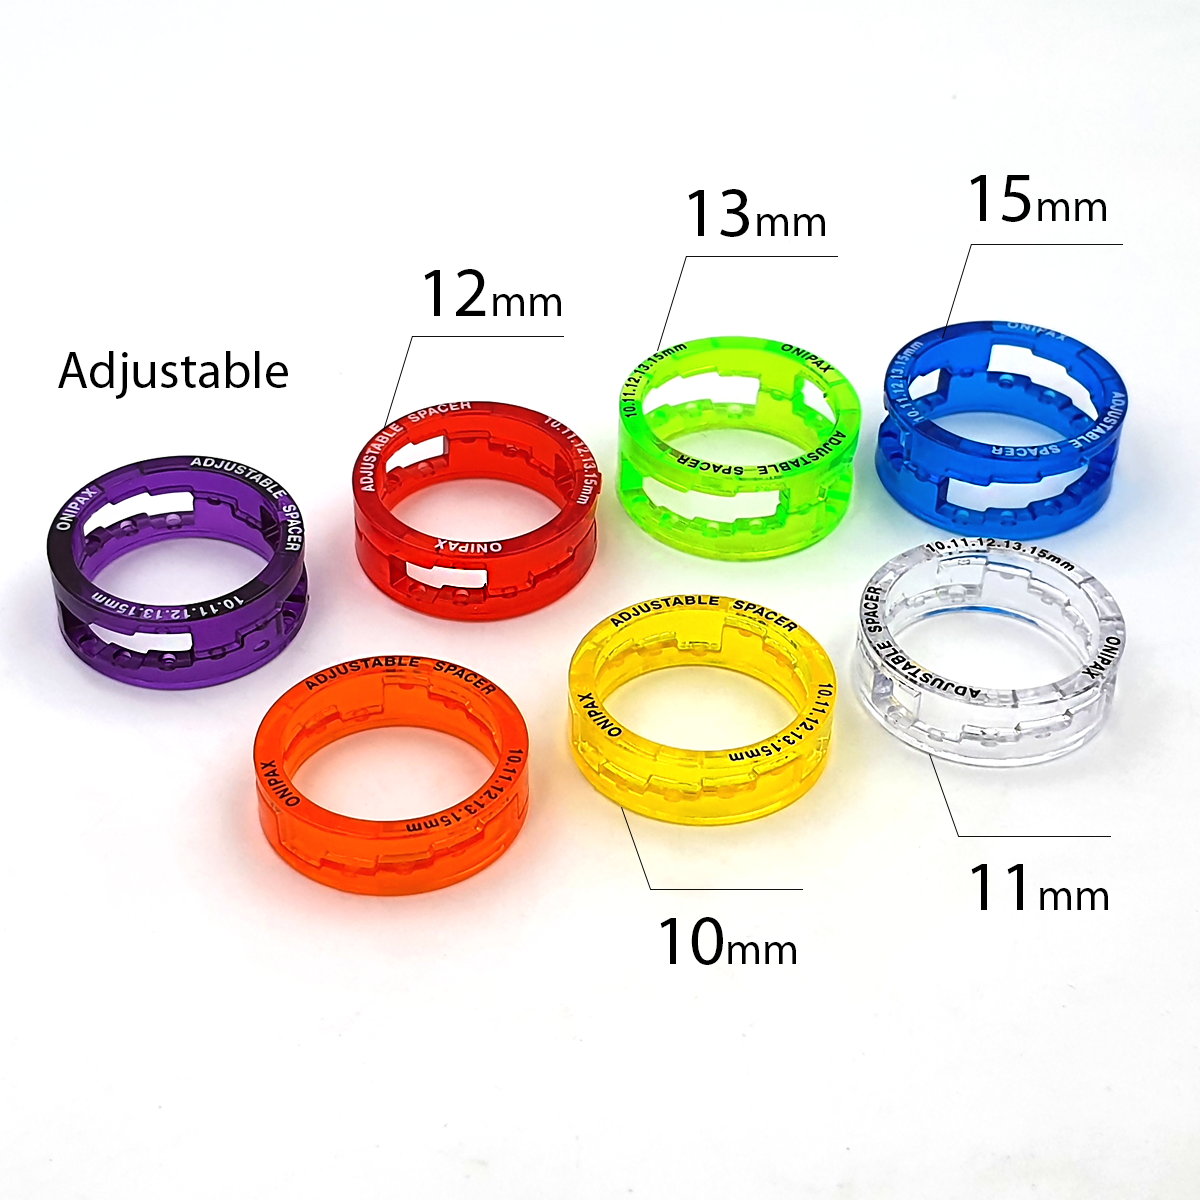 ONIPAX Adjustable Headset spacers. 1 1/8". One Set can Adjust to 10mm/11mm/12mm/13mm/15mm Height